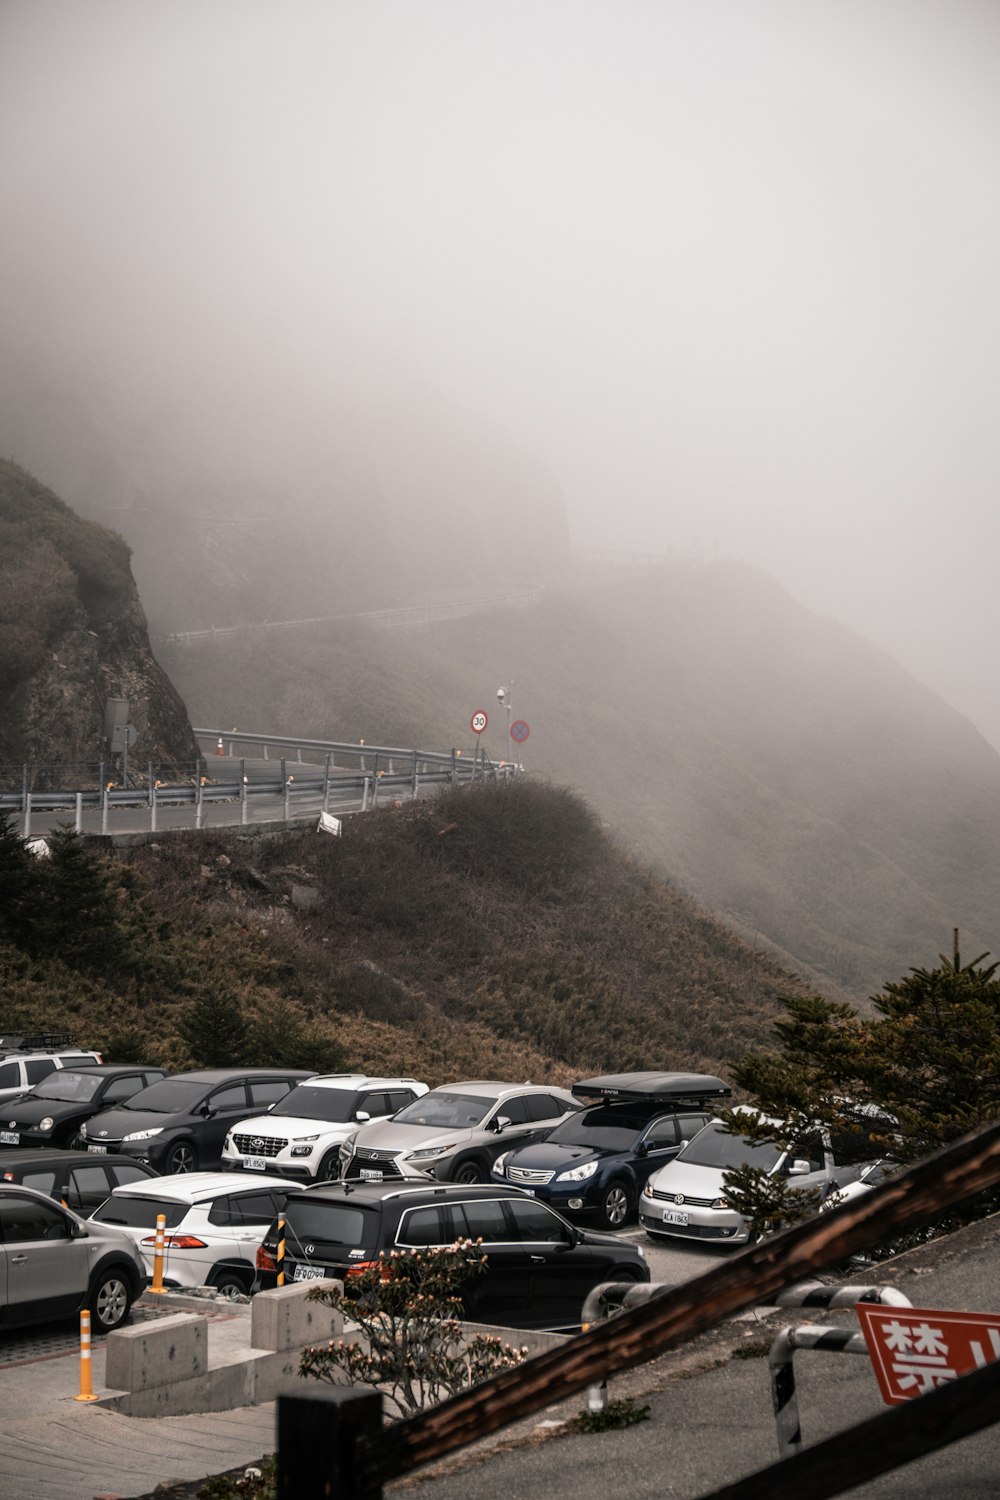 a parking lot filled with lots of cars on a foggy day